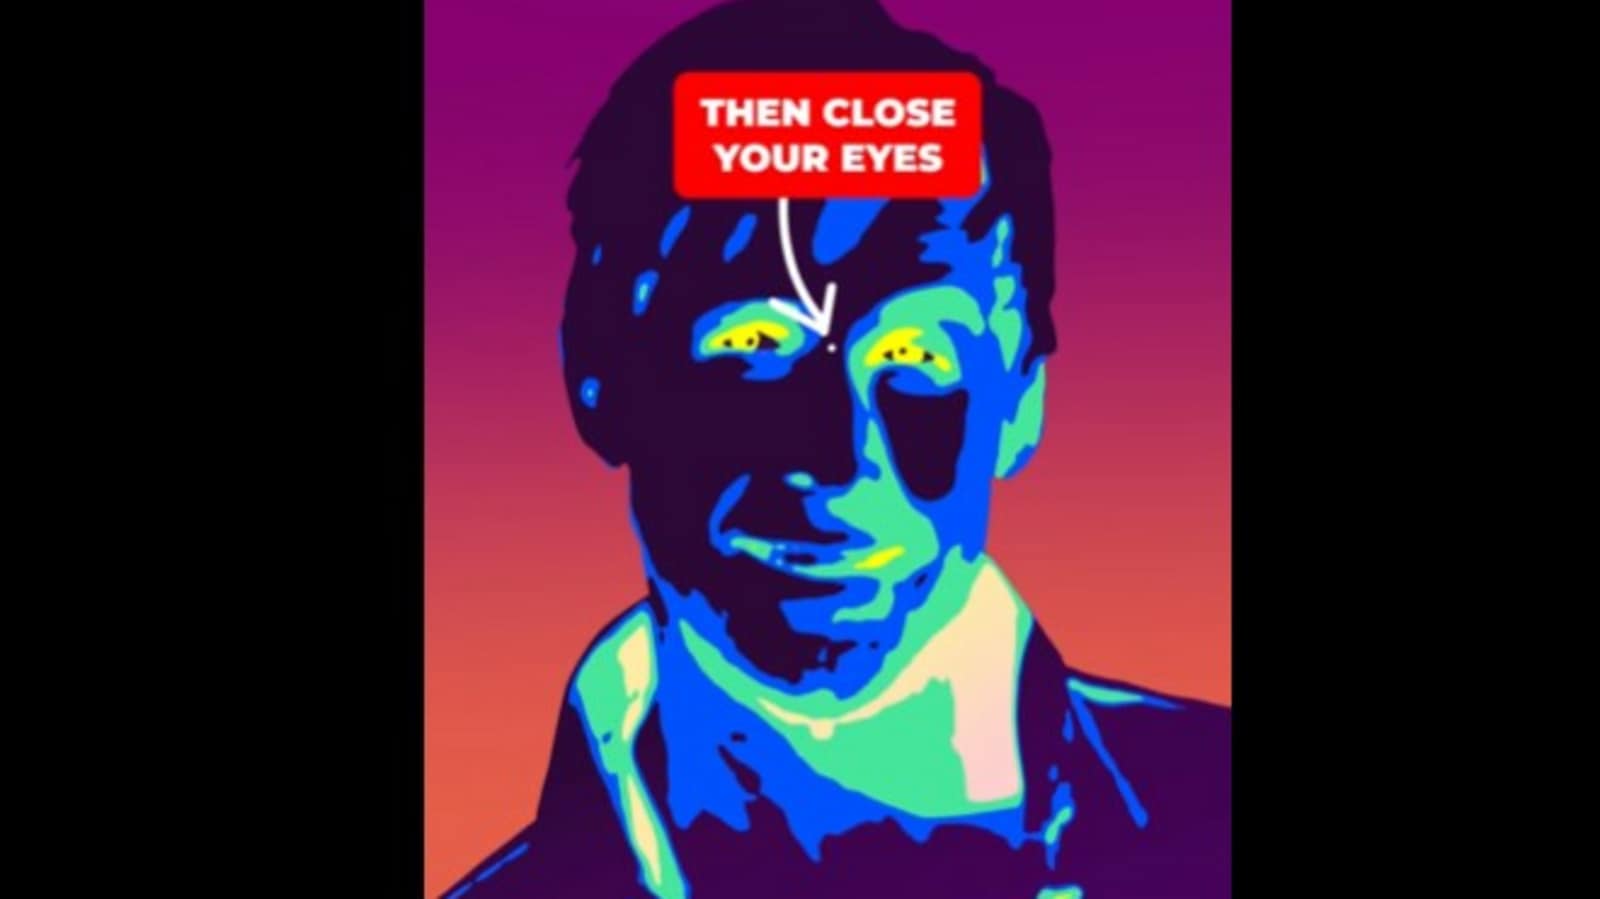 You can only see this optical illusion with your eyes closed. Try it now